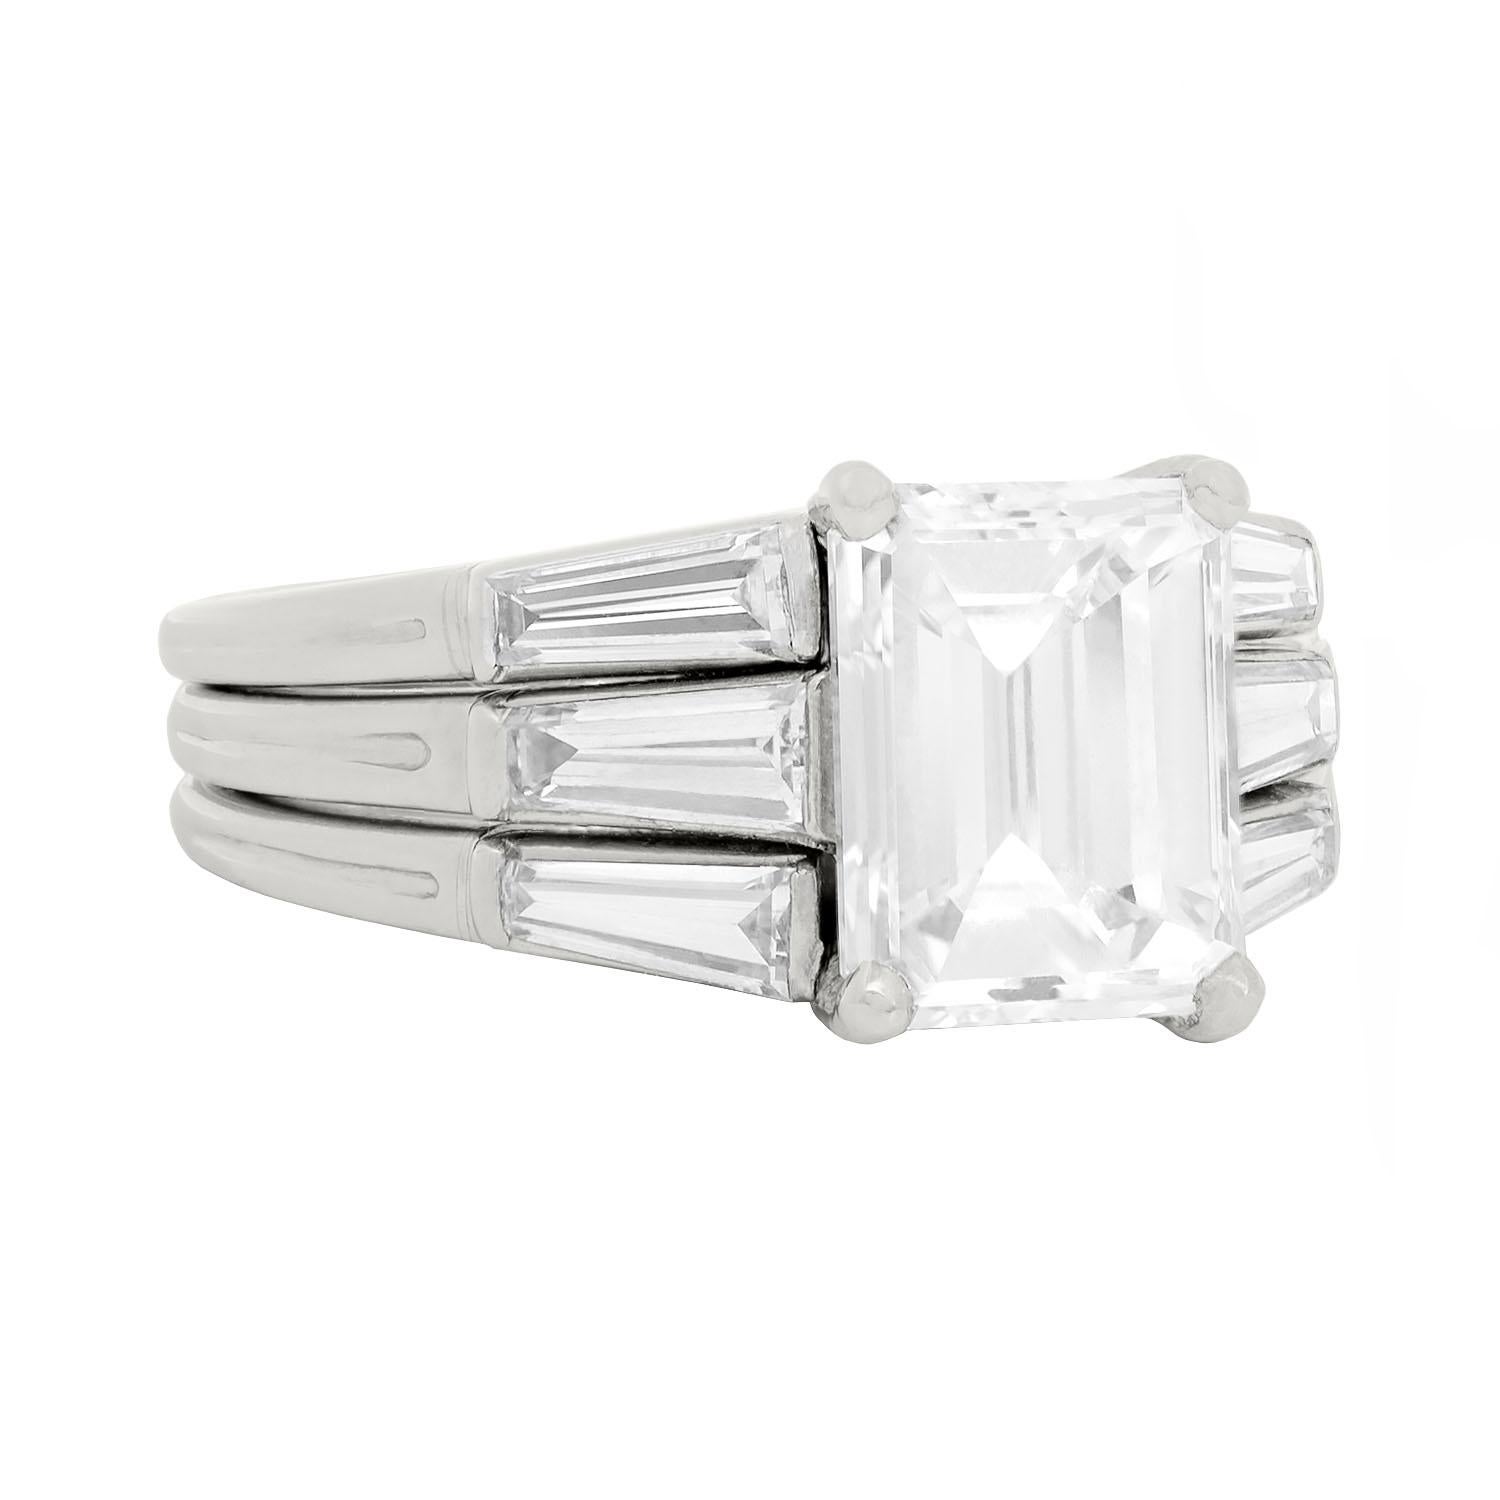 A simply outstanding diamond engagement ring from the Retro (ca1940) era by the famed maker Tiffany & Co.! This beautiful ring is made of platinum and holds a gorgeous Emerald Cut diamond at the center. The diamond, which is prong set, has I color